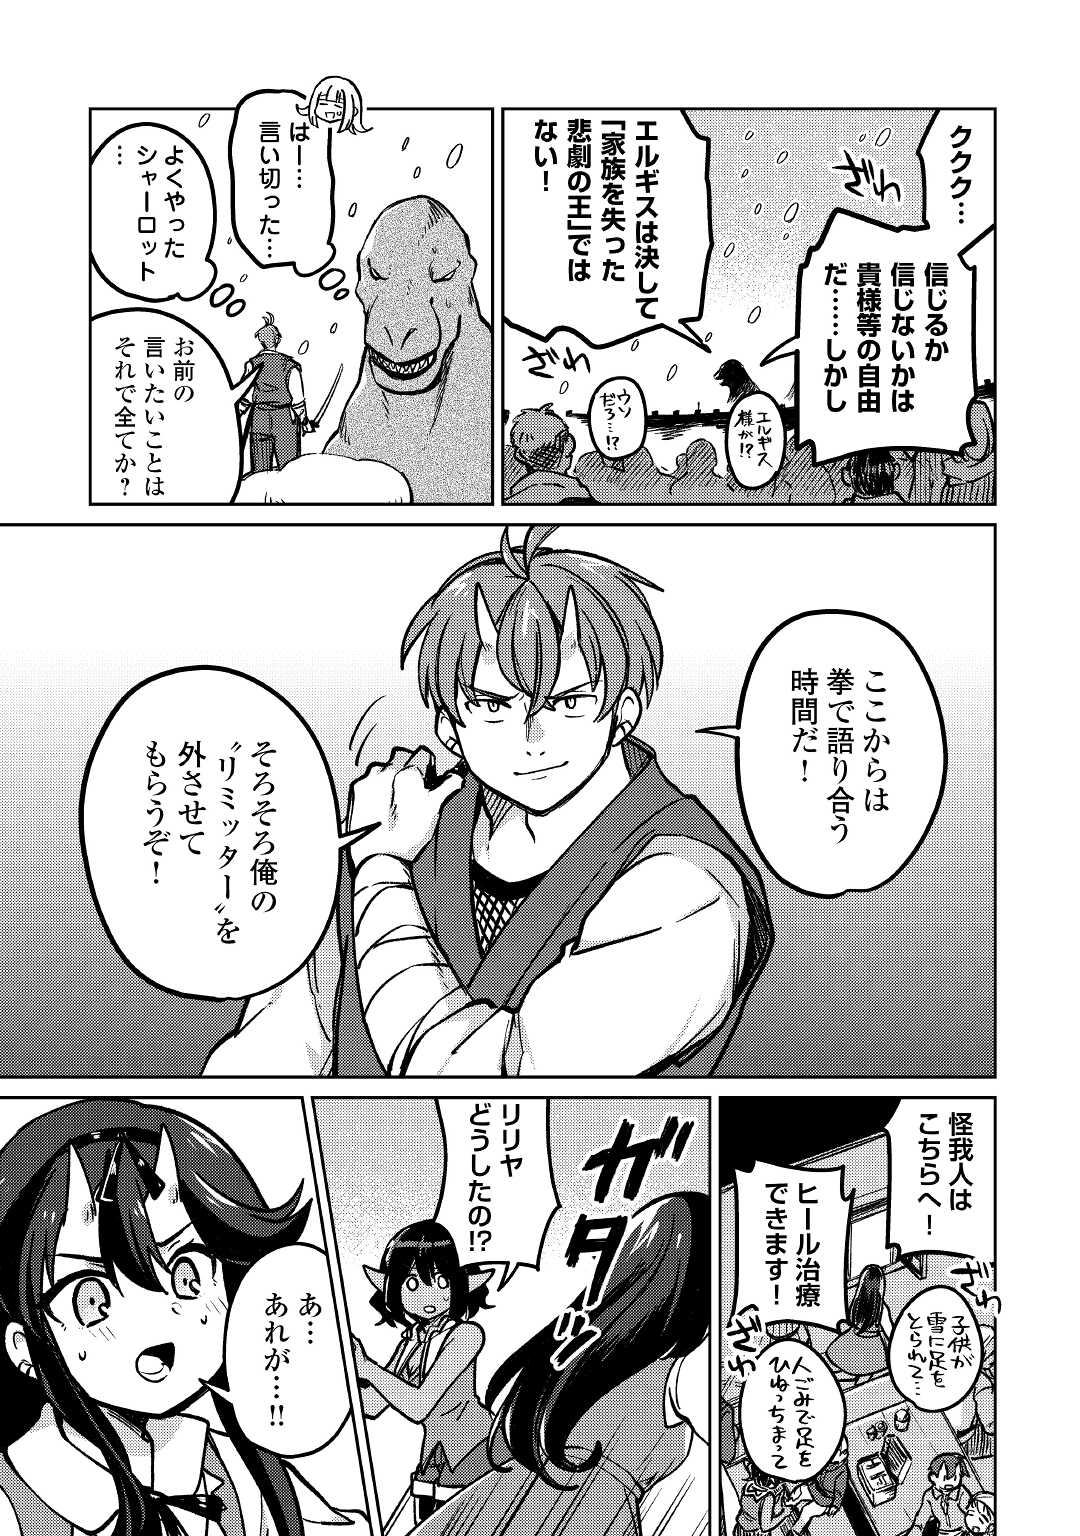 The Former Structural Researcher’s Story of Otherworldly Adventure 第37話 - Page 9